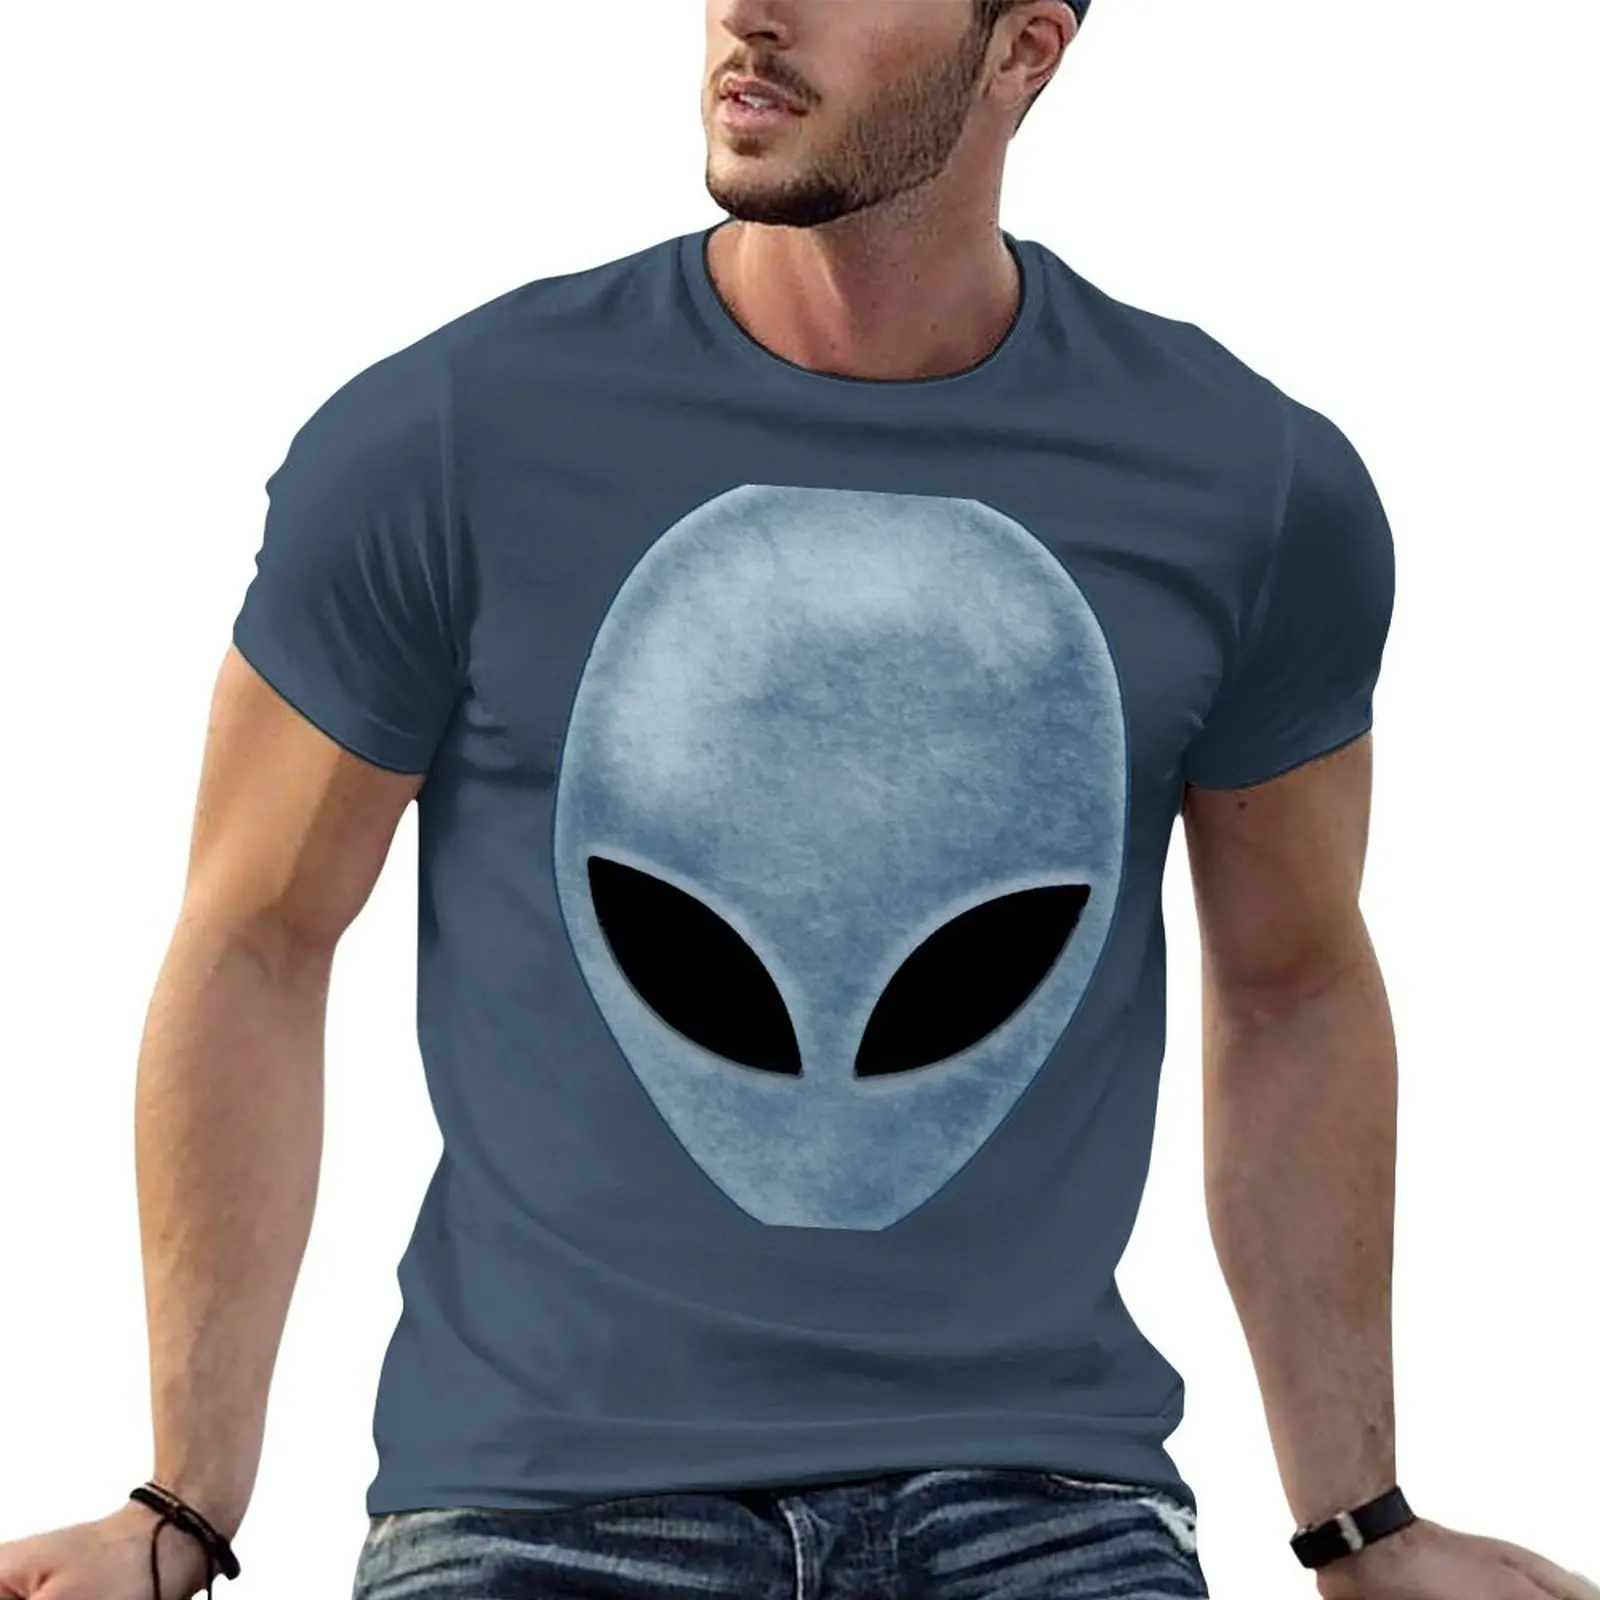 

Angry Dude 2 Alien T-shirt tops Aesthetic clothing tshirts for men